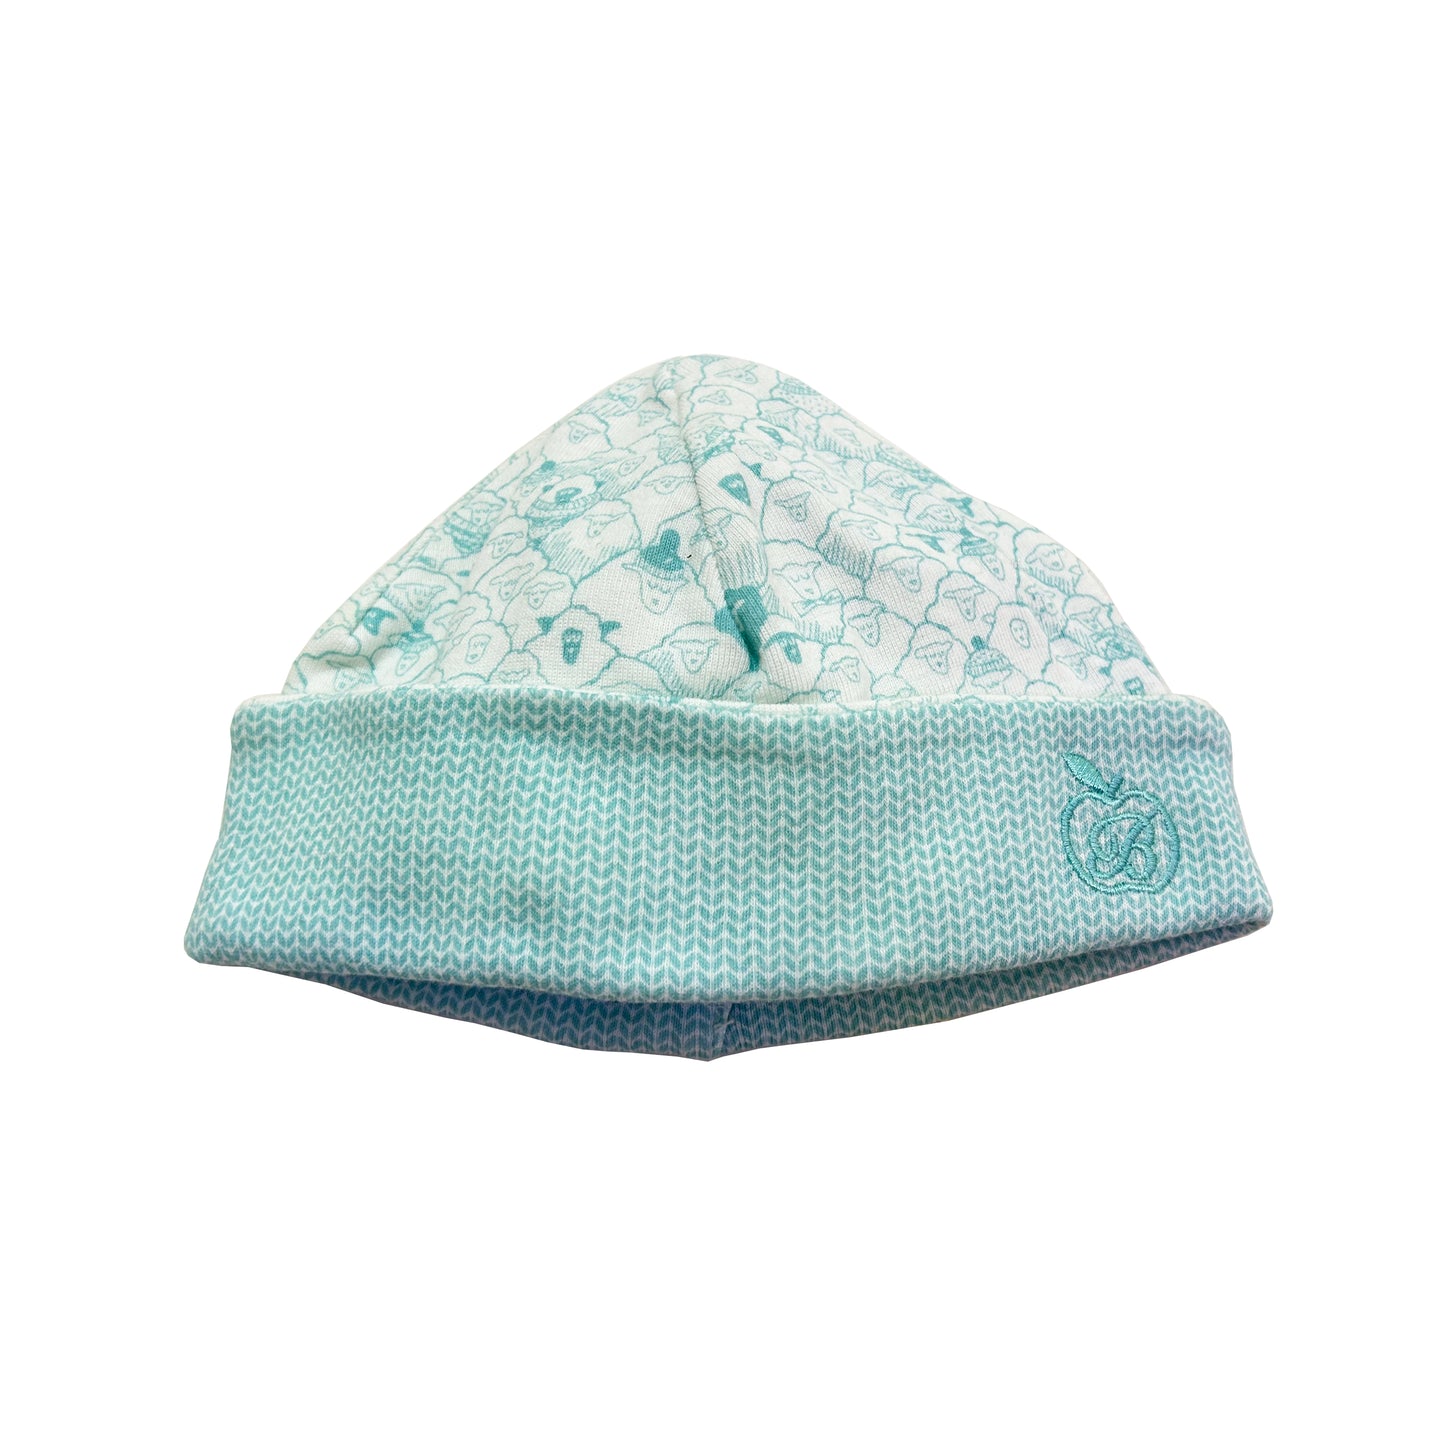 HAT - BABY - GREEN - BBA-168